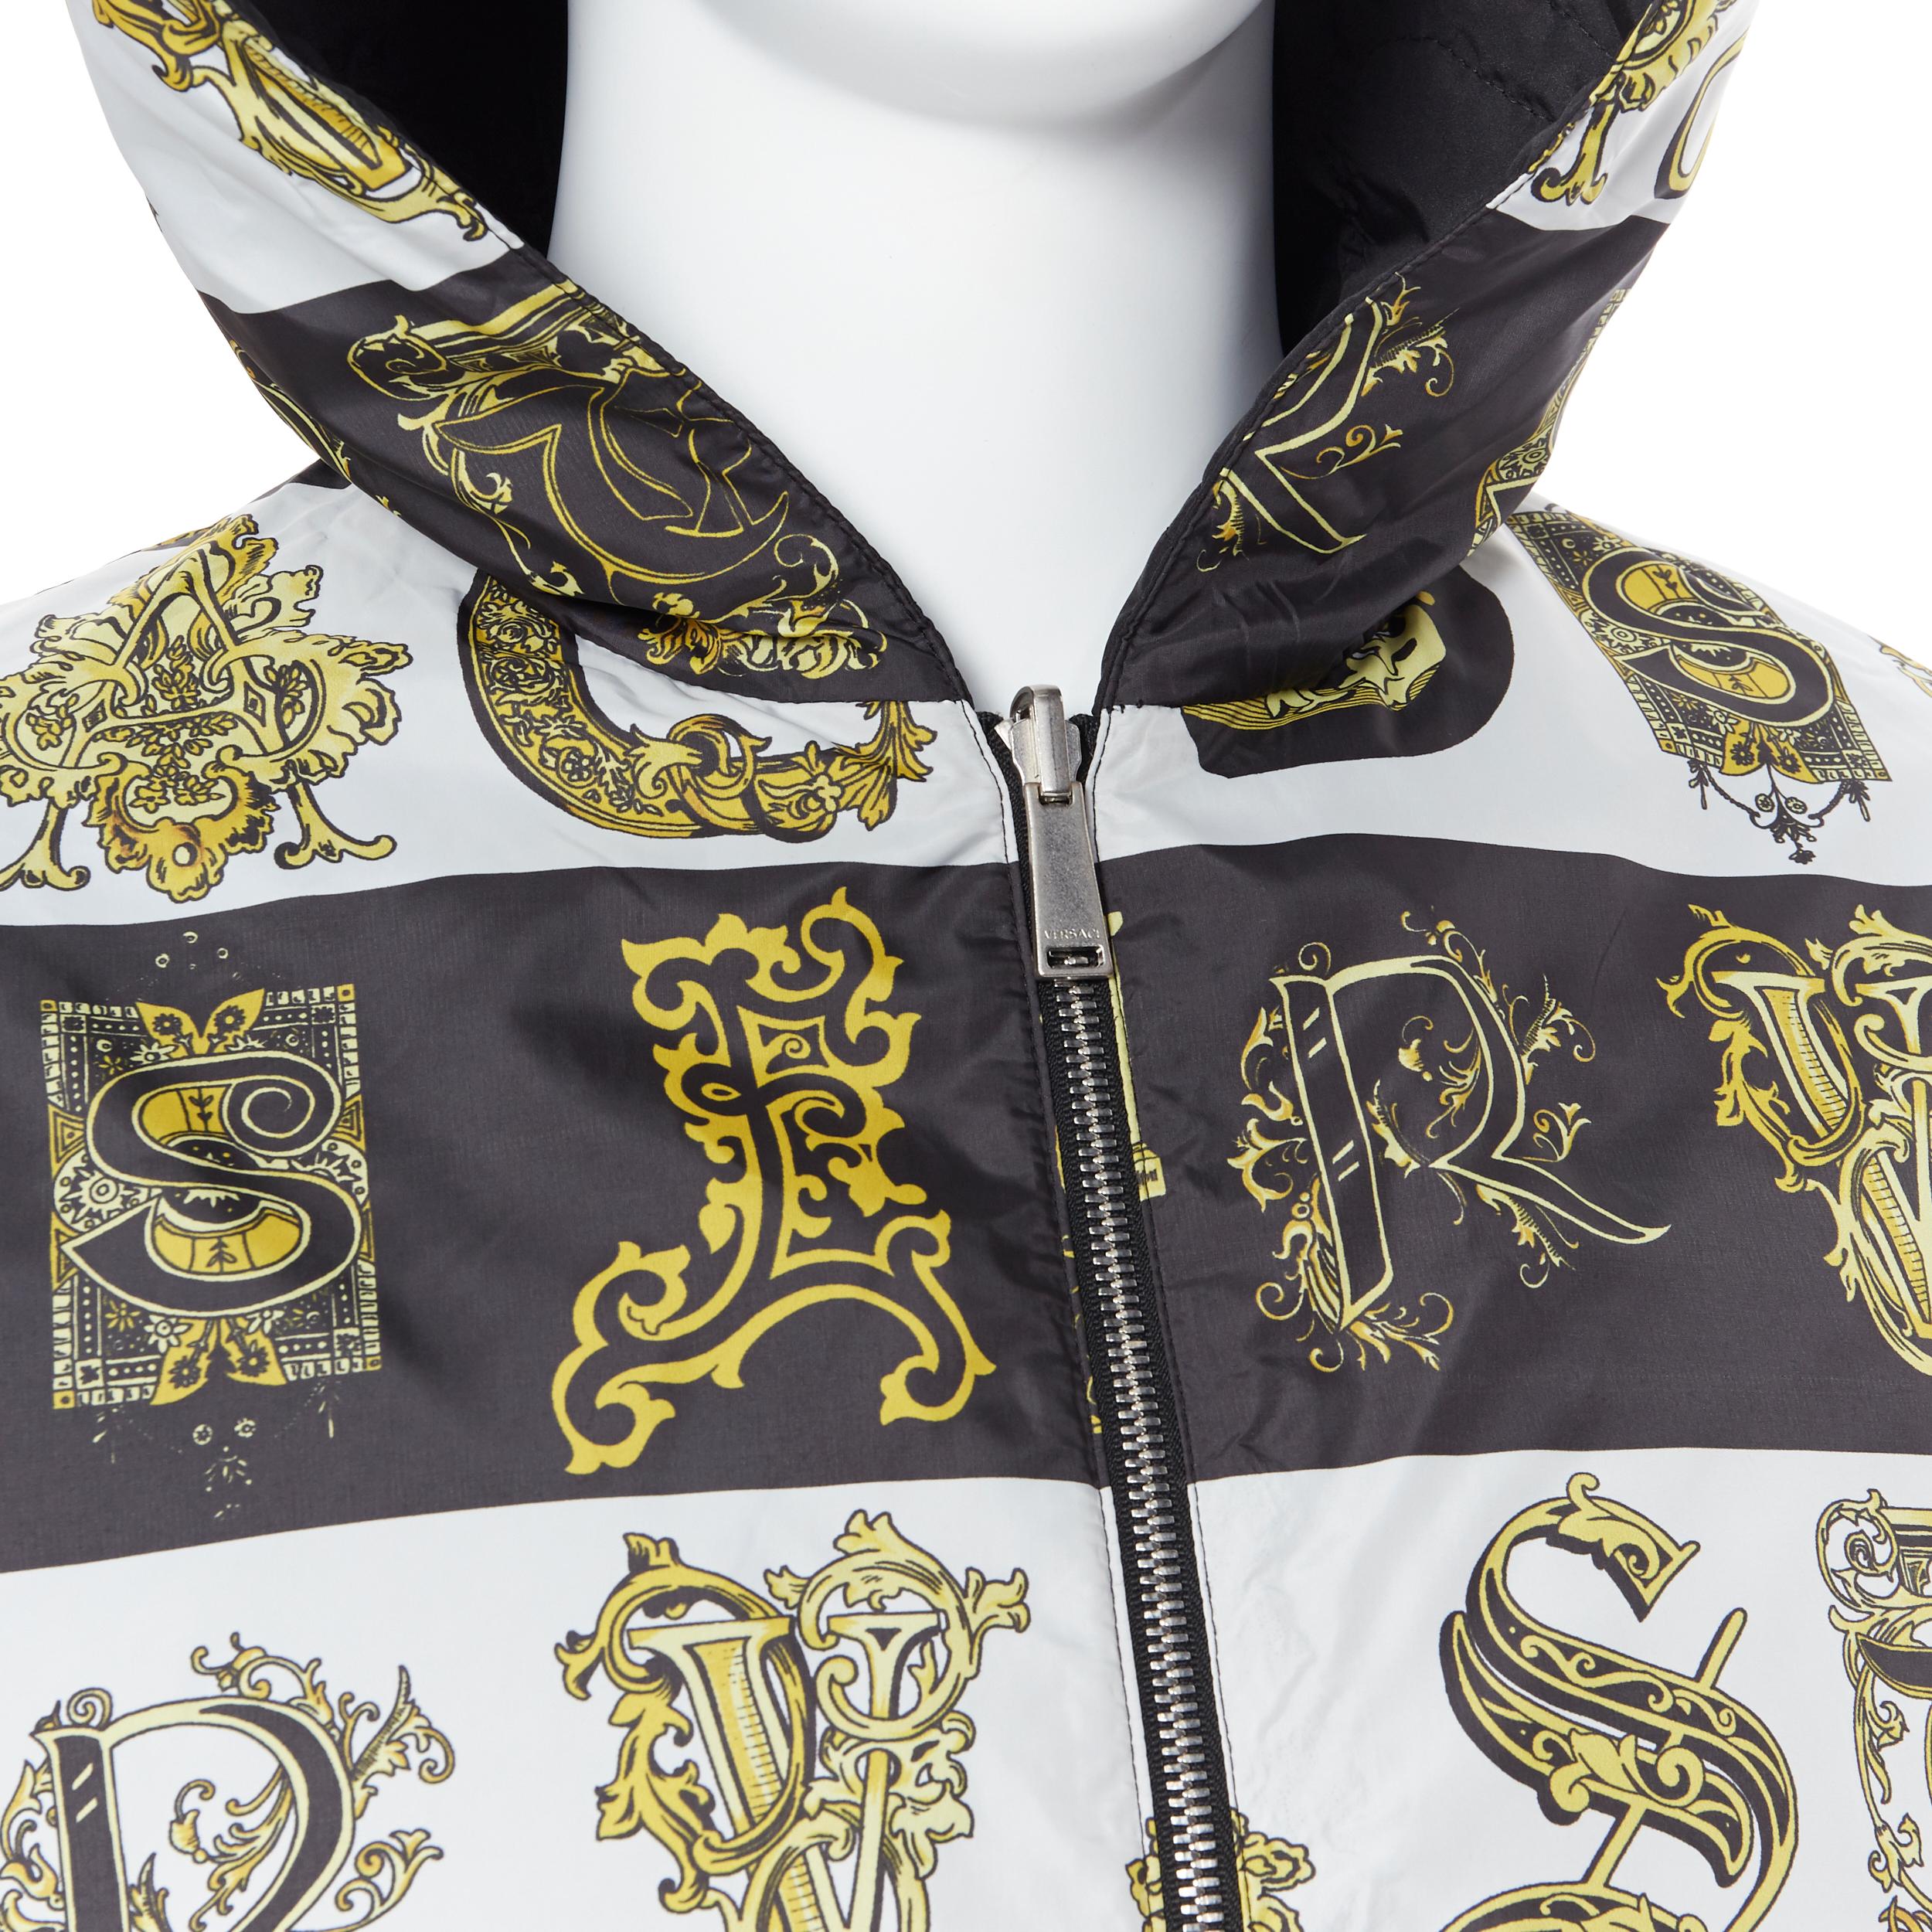 new VERSACE Reversible Baroque Alphabet gold print nylon quilted jacket IT54 2XL
Brand: Versace
Designer: Donatella Versace
Collection: 2019
Model Name / Style: Reversible jacket
Material: Nylon
Color: Multicolour
Pattern: Abstract; Baroque